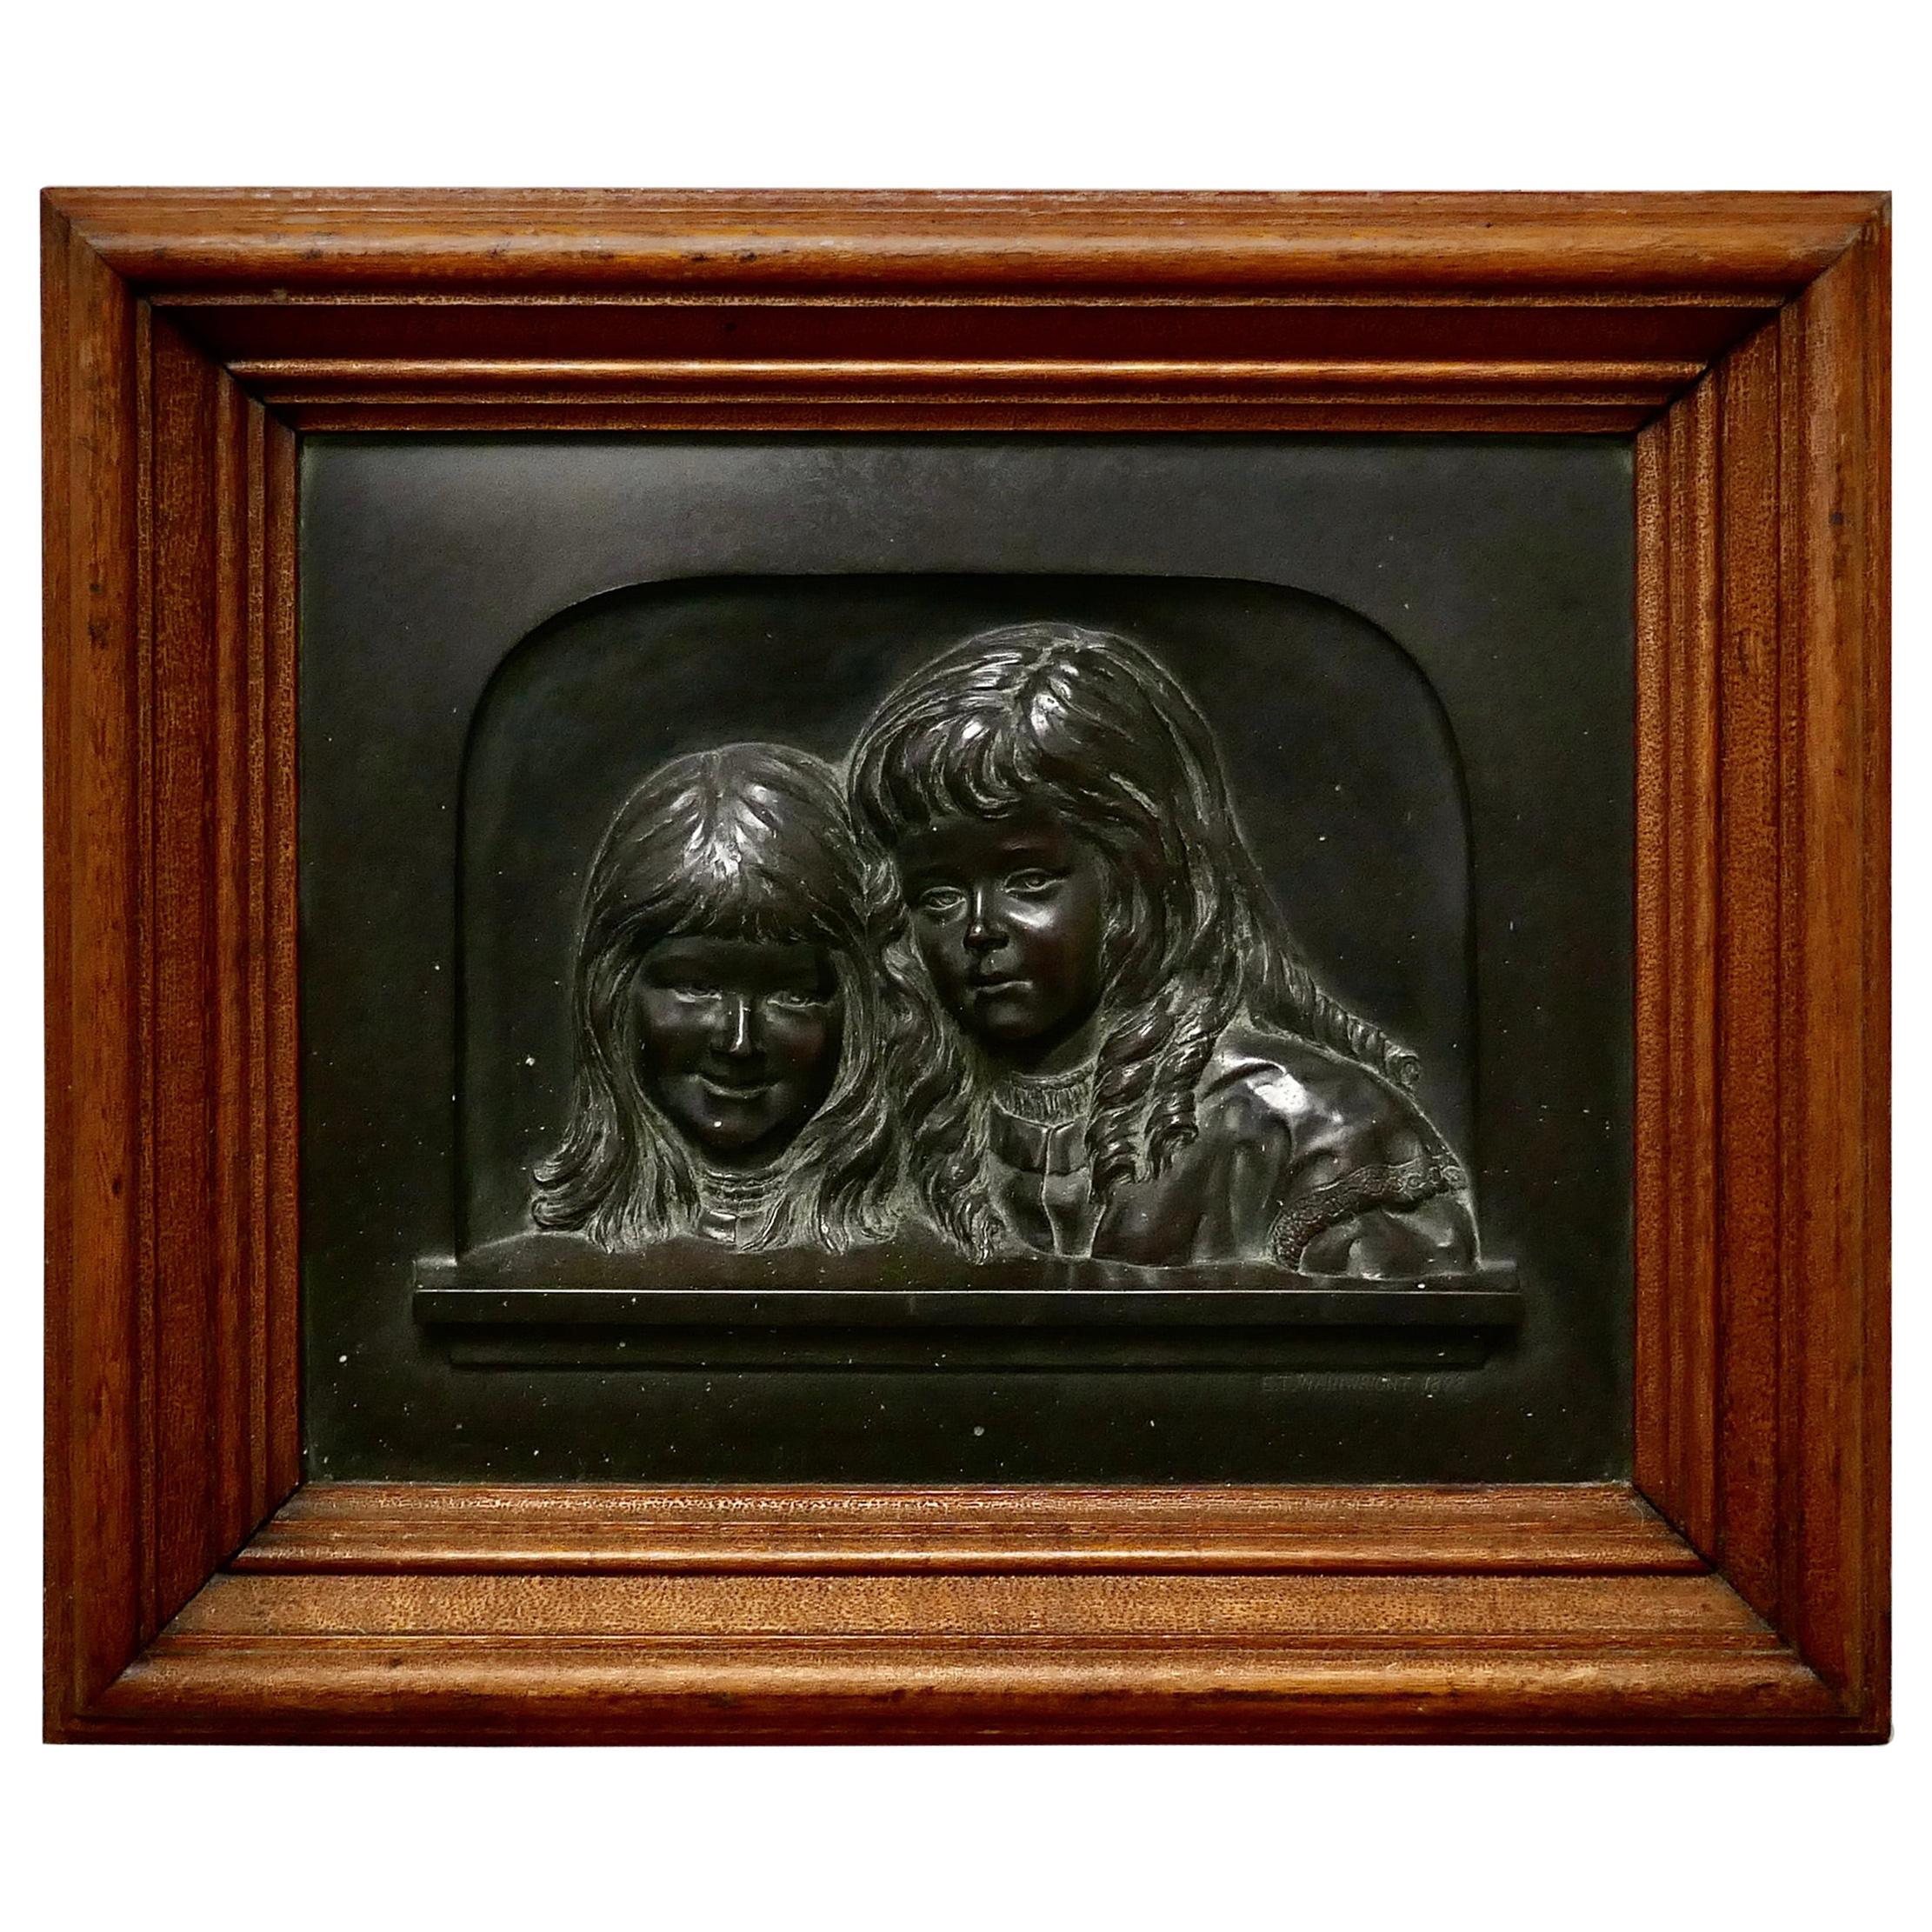 Heavy Bronze Relief Wall Plaque, “Sisters” by E T Wainwright 1898 For Sale